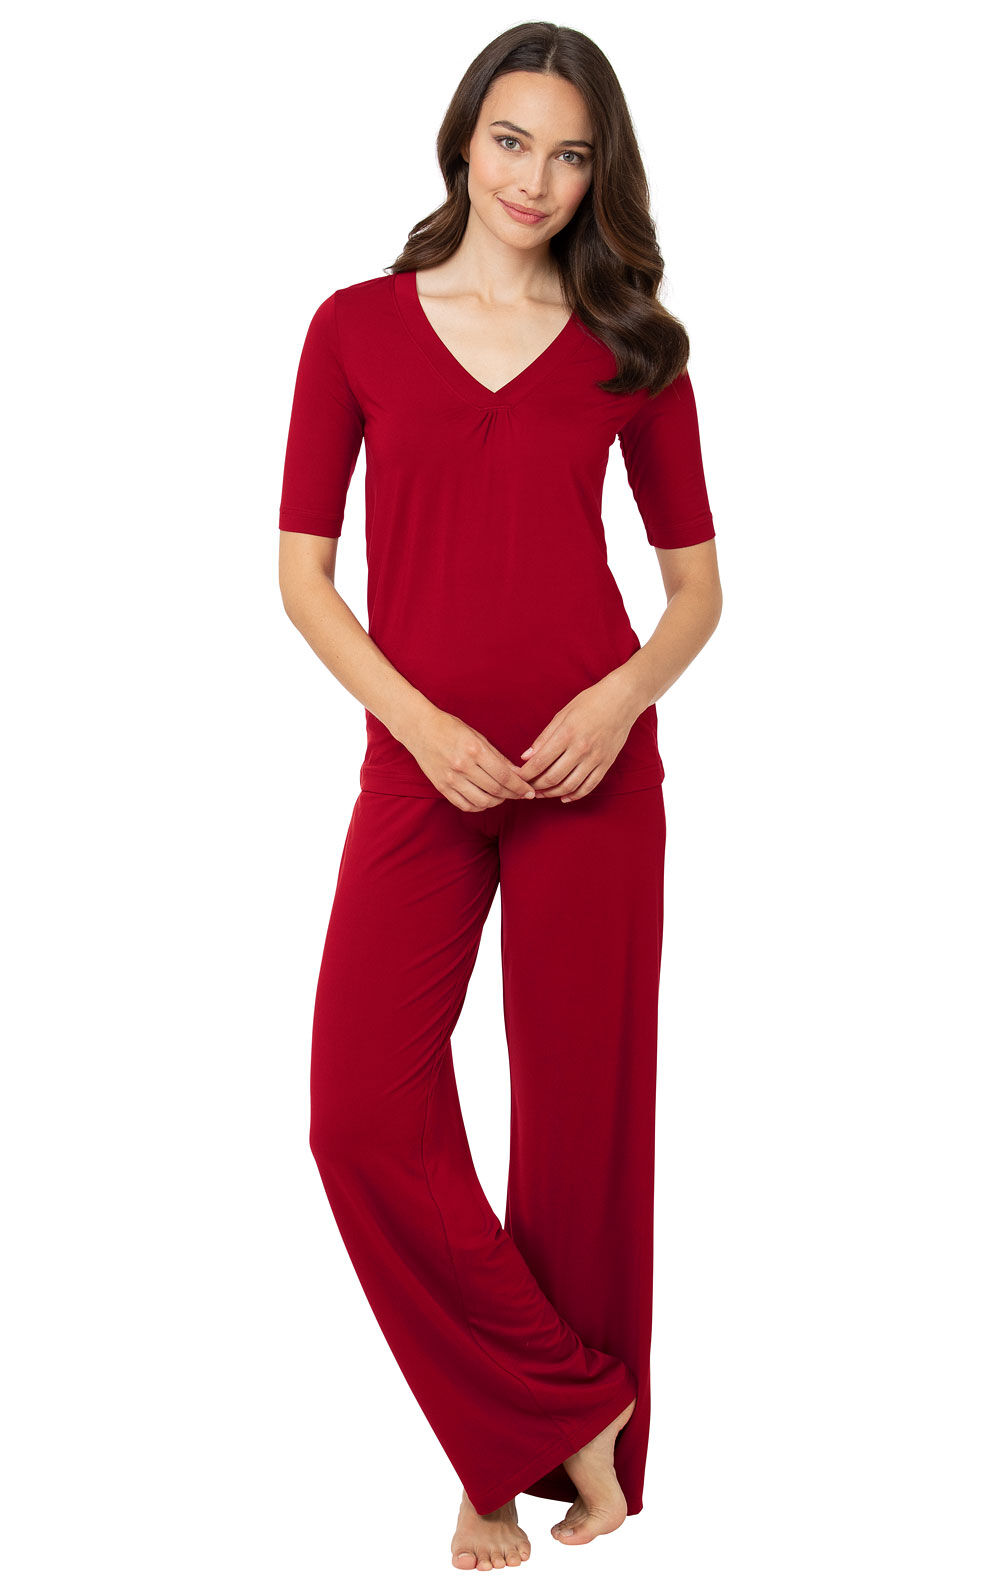 556 × 350 Source:https://www.pajamagram.com/women/womens-collections/natura...